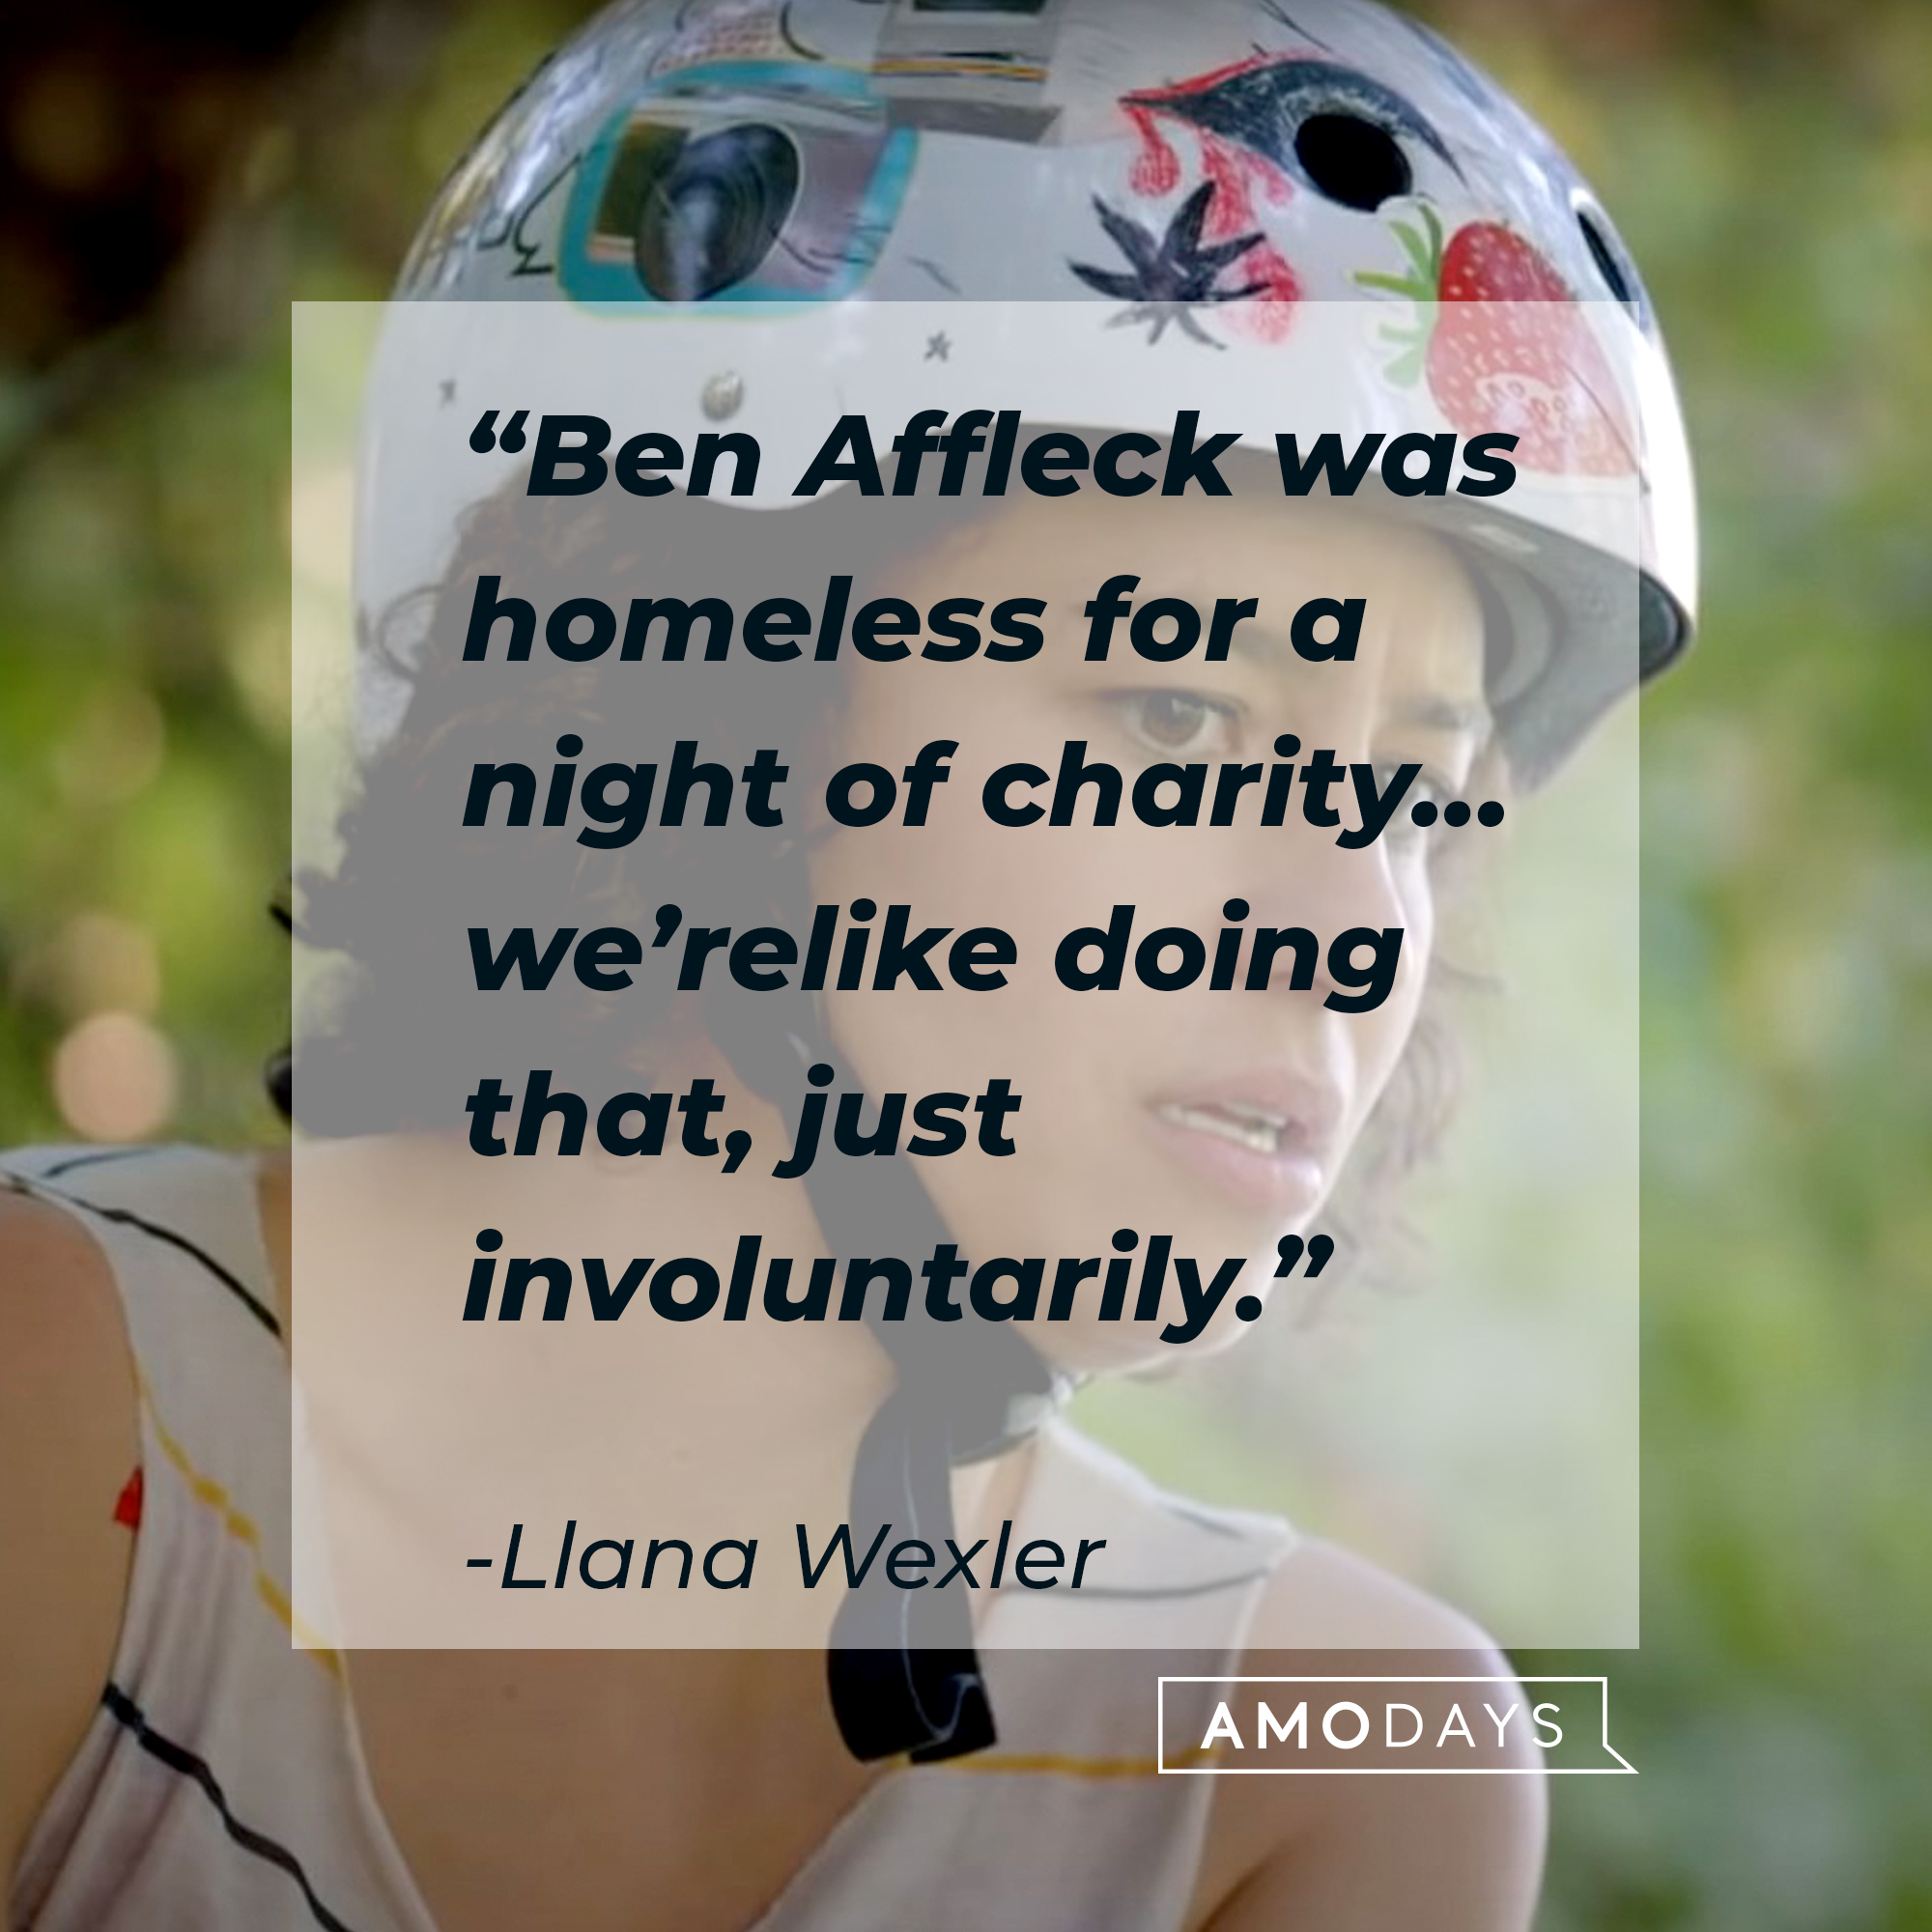 An image of Llana Wexler with her quote: “Ben Affleck was homeless for a night of charity…we’re like doing that, just involuntarily.” | Source: youtube.com/ComedyCentral